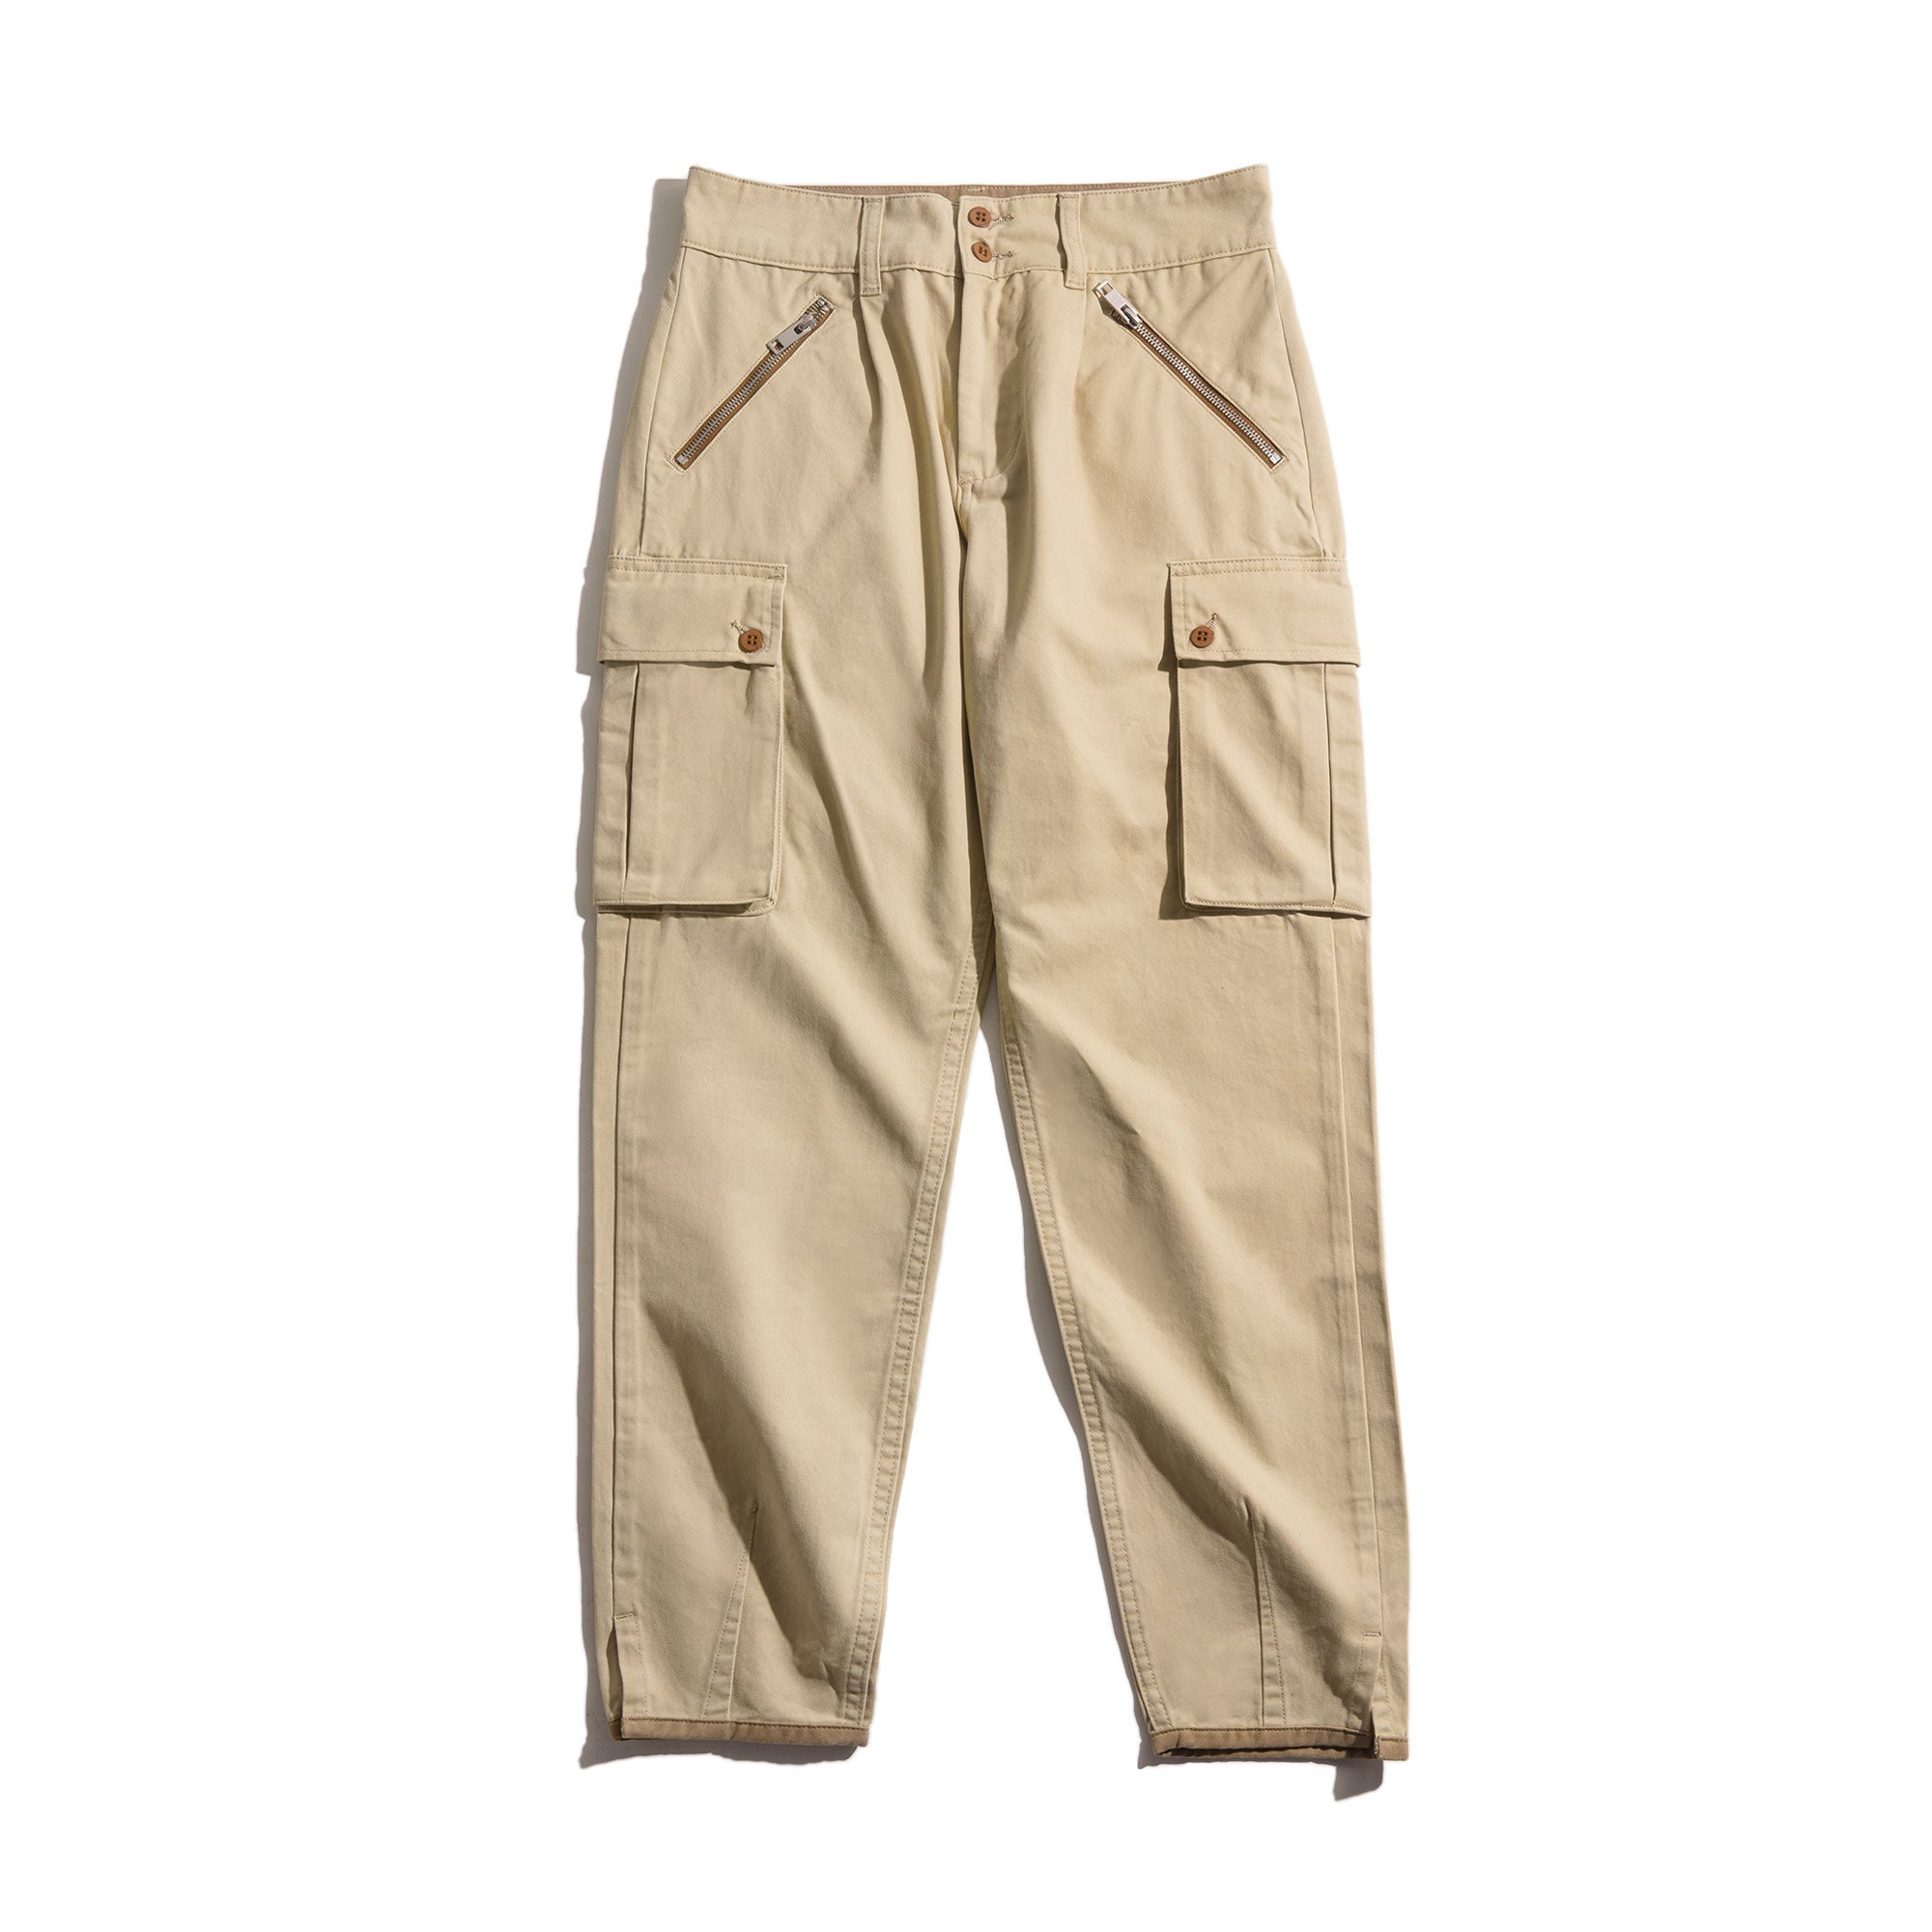 Tapered Mountain Outdoor Straight Leg Trousers